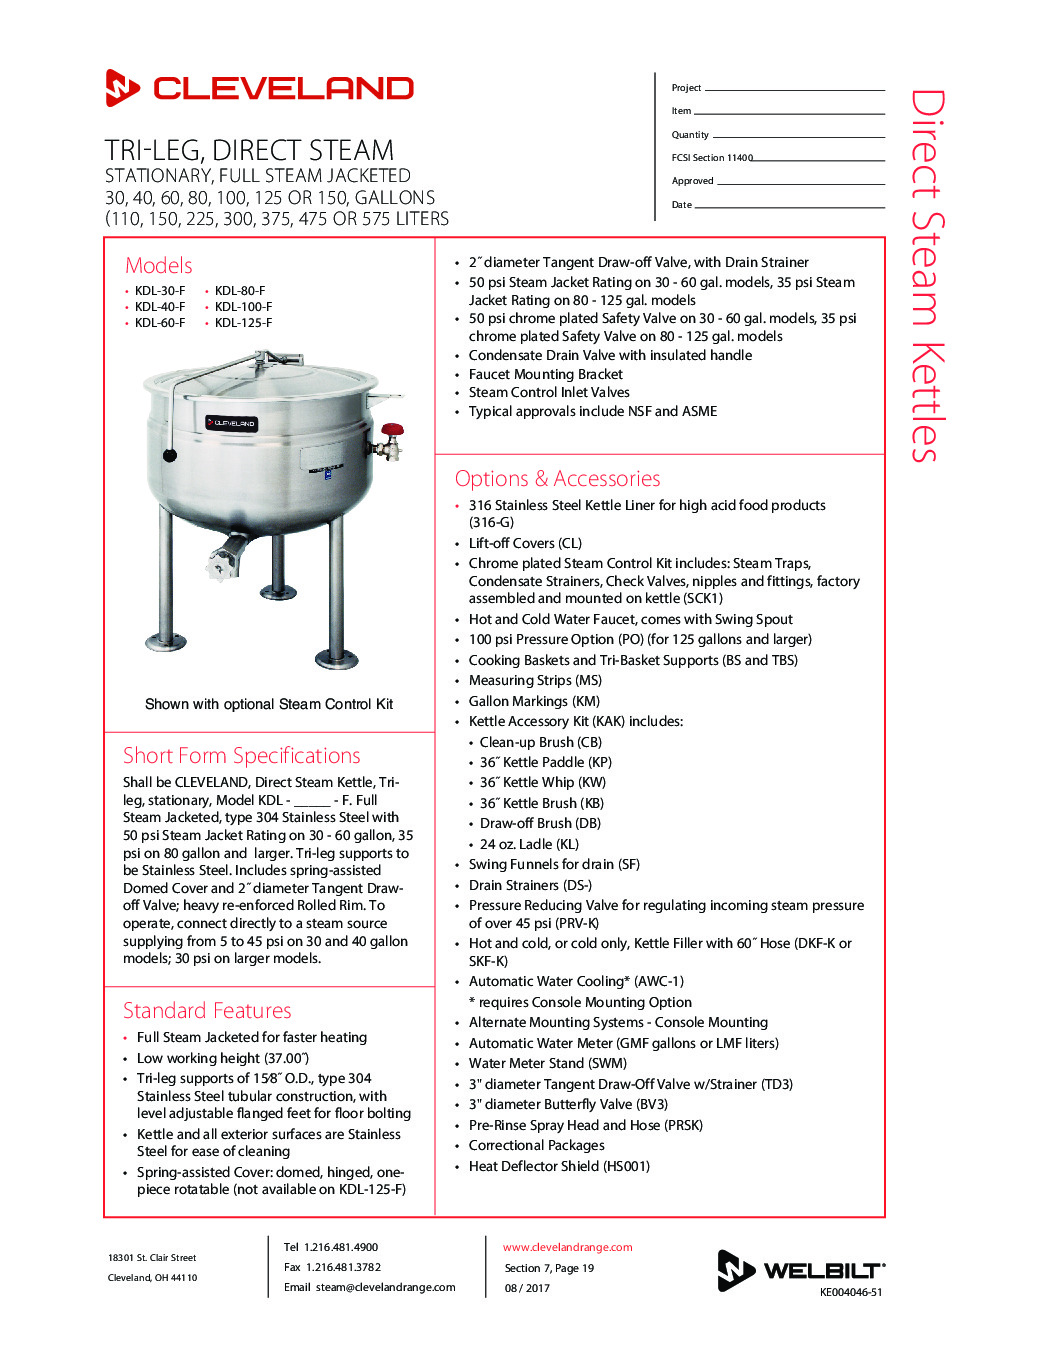 Cleveland KDL100F Stationary Direct Steam Kettle